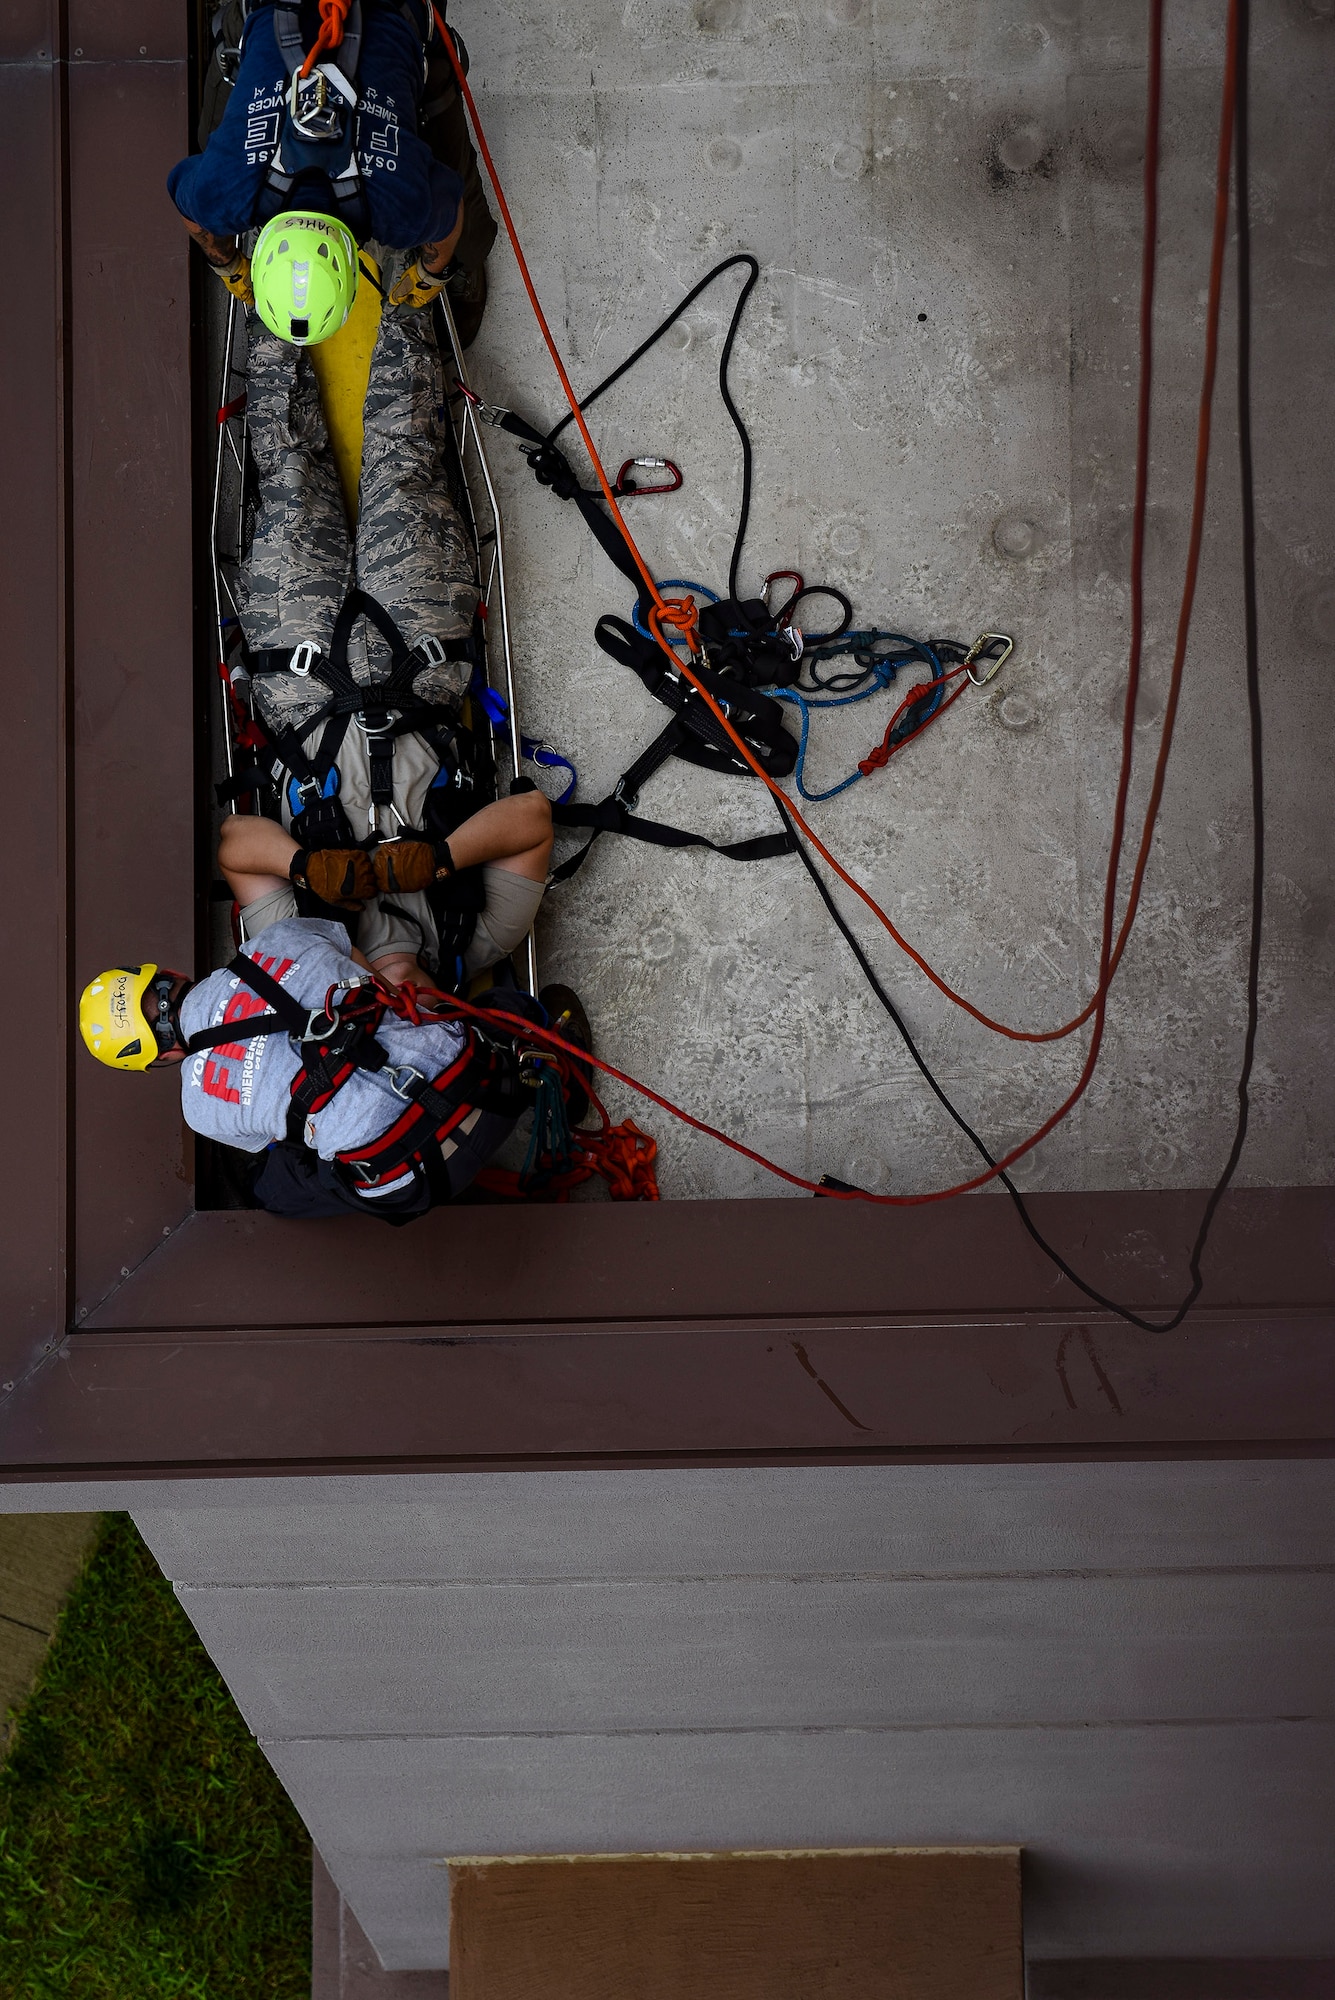 Pacific Air Forces firefighters secure a simulated victim into a stokes basket during a Department of Defense Rescue Technician course, Sept. 9, 2019, at Osan Air Base, Republic of Korea. Instructors from Andersen Air Force Base, Guam’s 554th RED HORSE Squadron trained and tested 10 Pacific Air Forces firefighters from three bases on high-risk, elevated and confined space rescue tactics. (U.S. Air Force photo by Staff Sgt. Greg Nash)